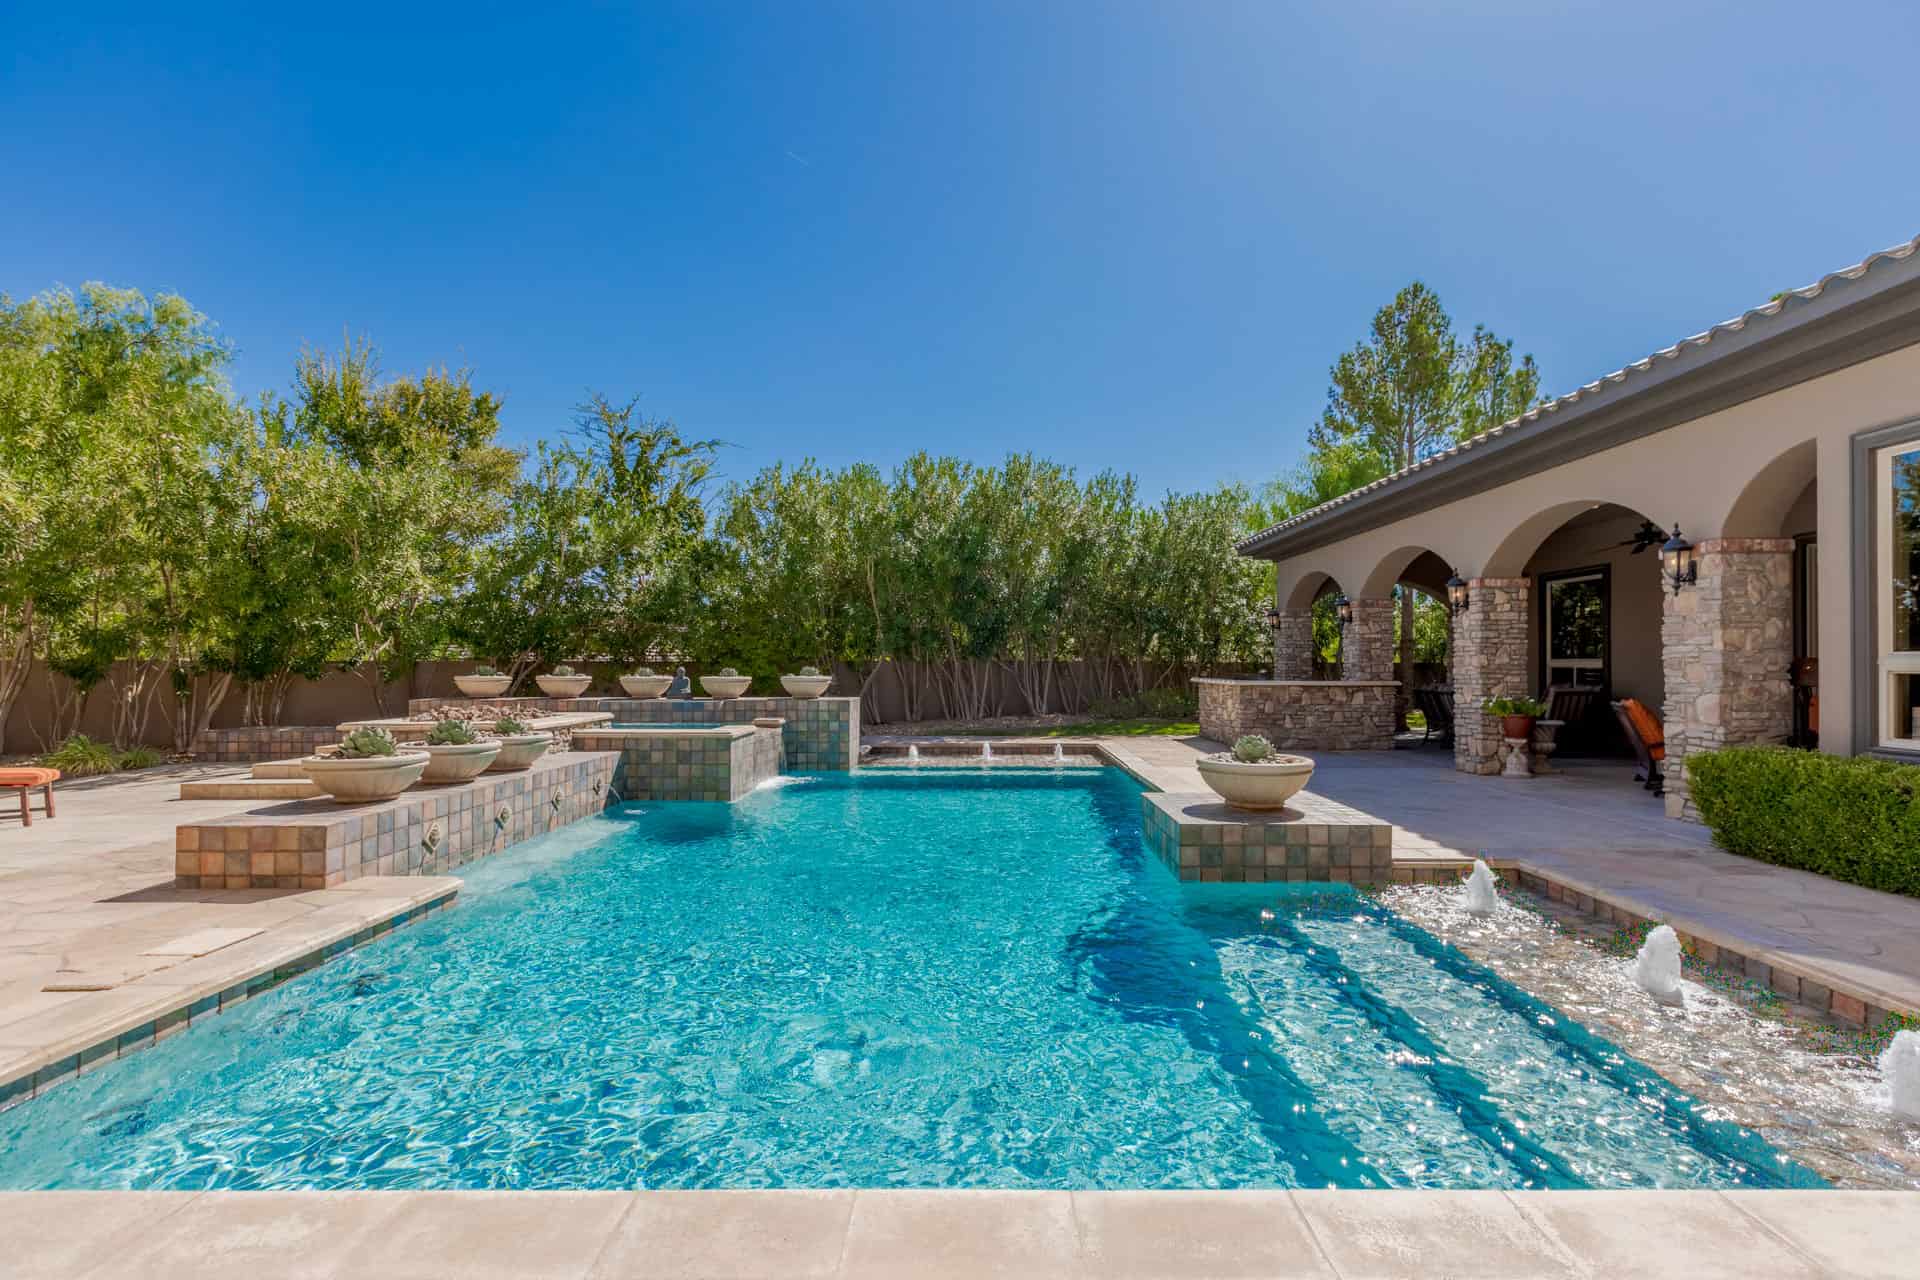 las-vegas-luxry-real-estate-realtor-rob-jensen-company-10981-willow-valley-court-willow-creek6974